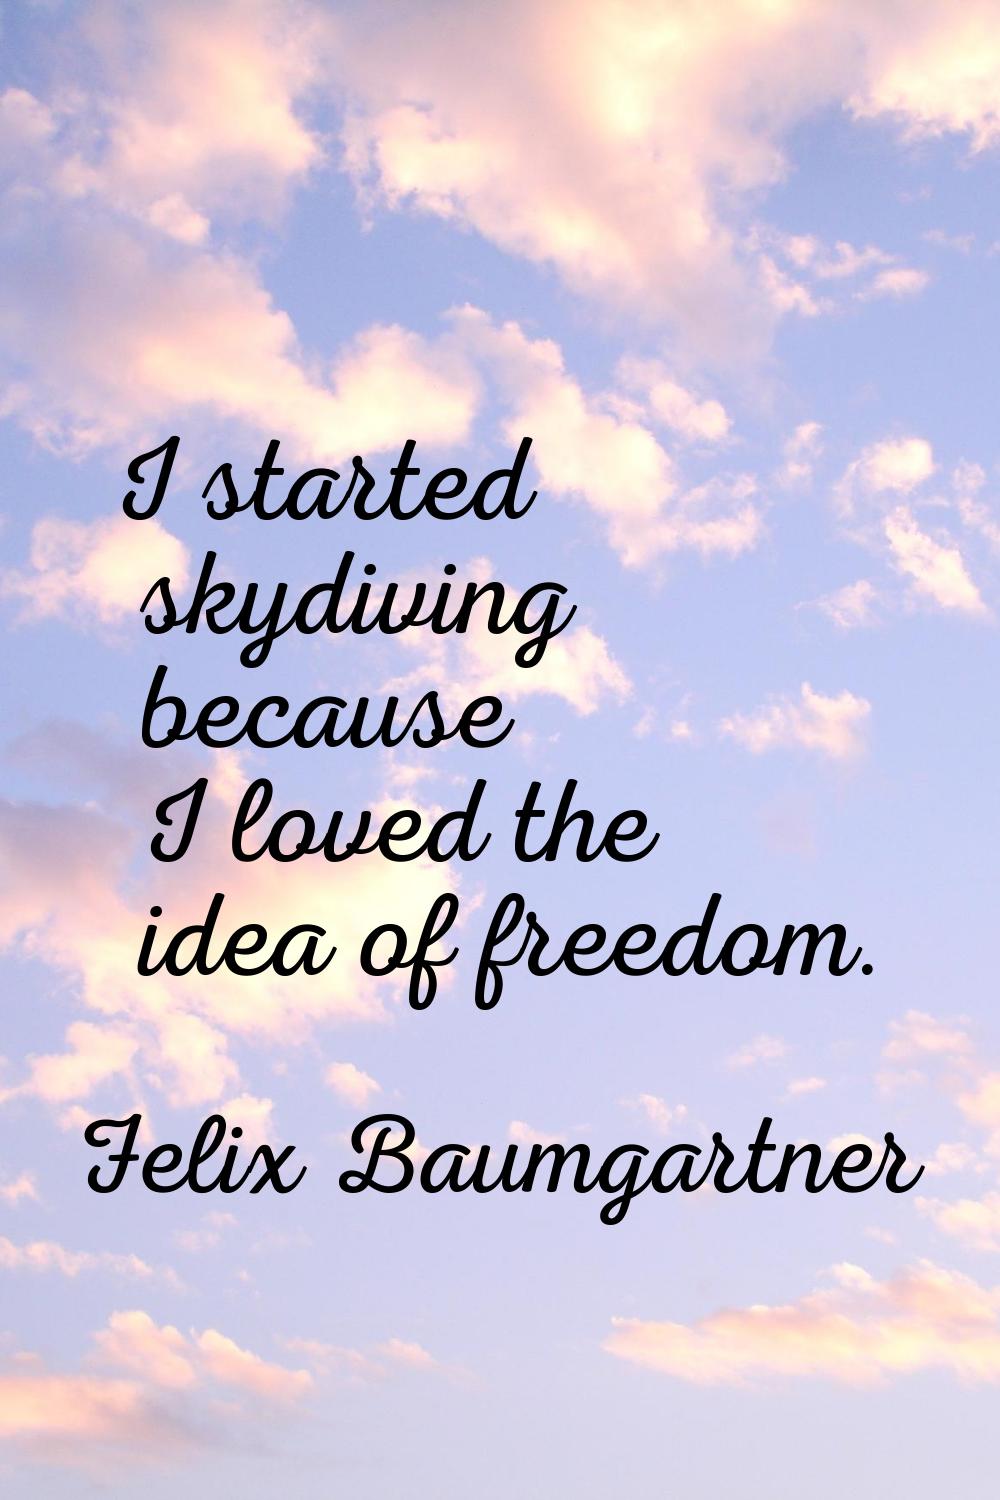 I started skydiving because I loved the idea of freedom.